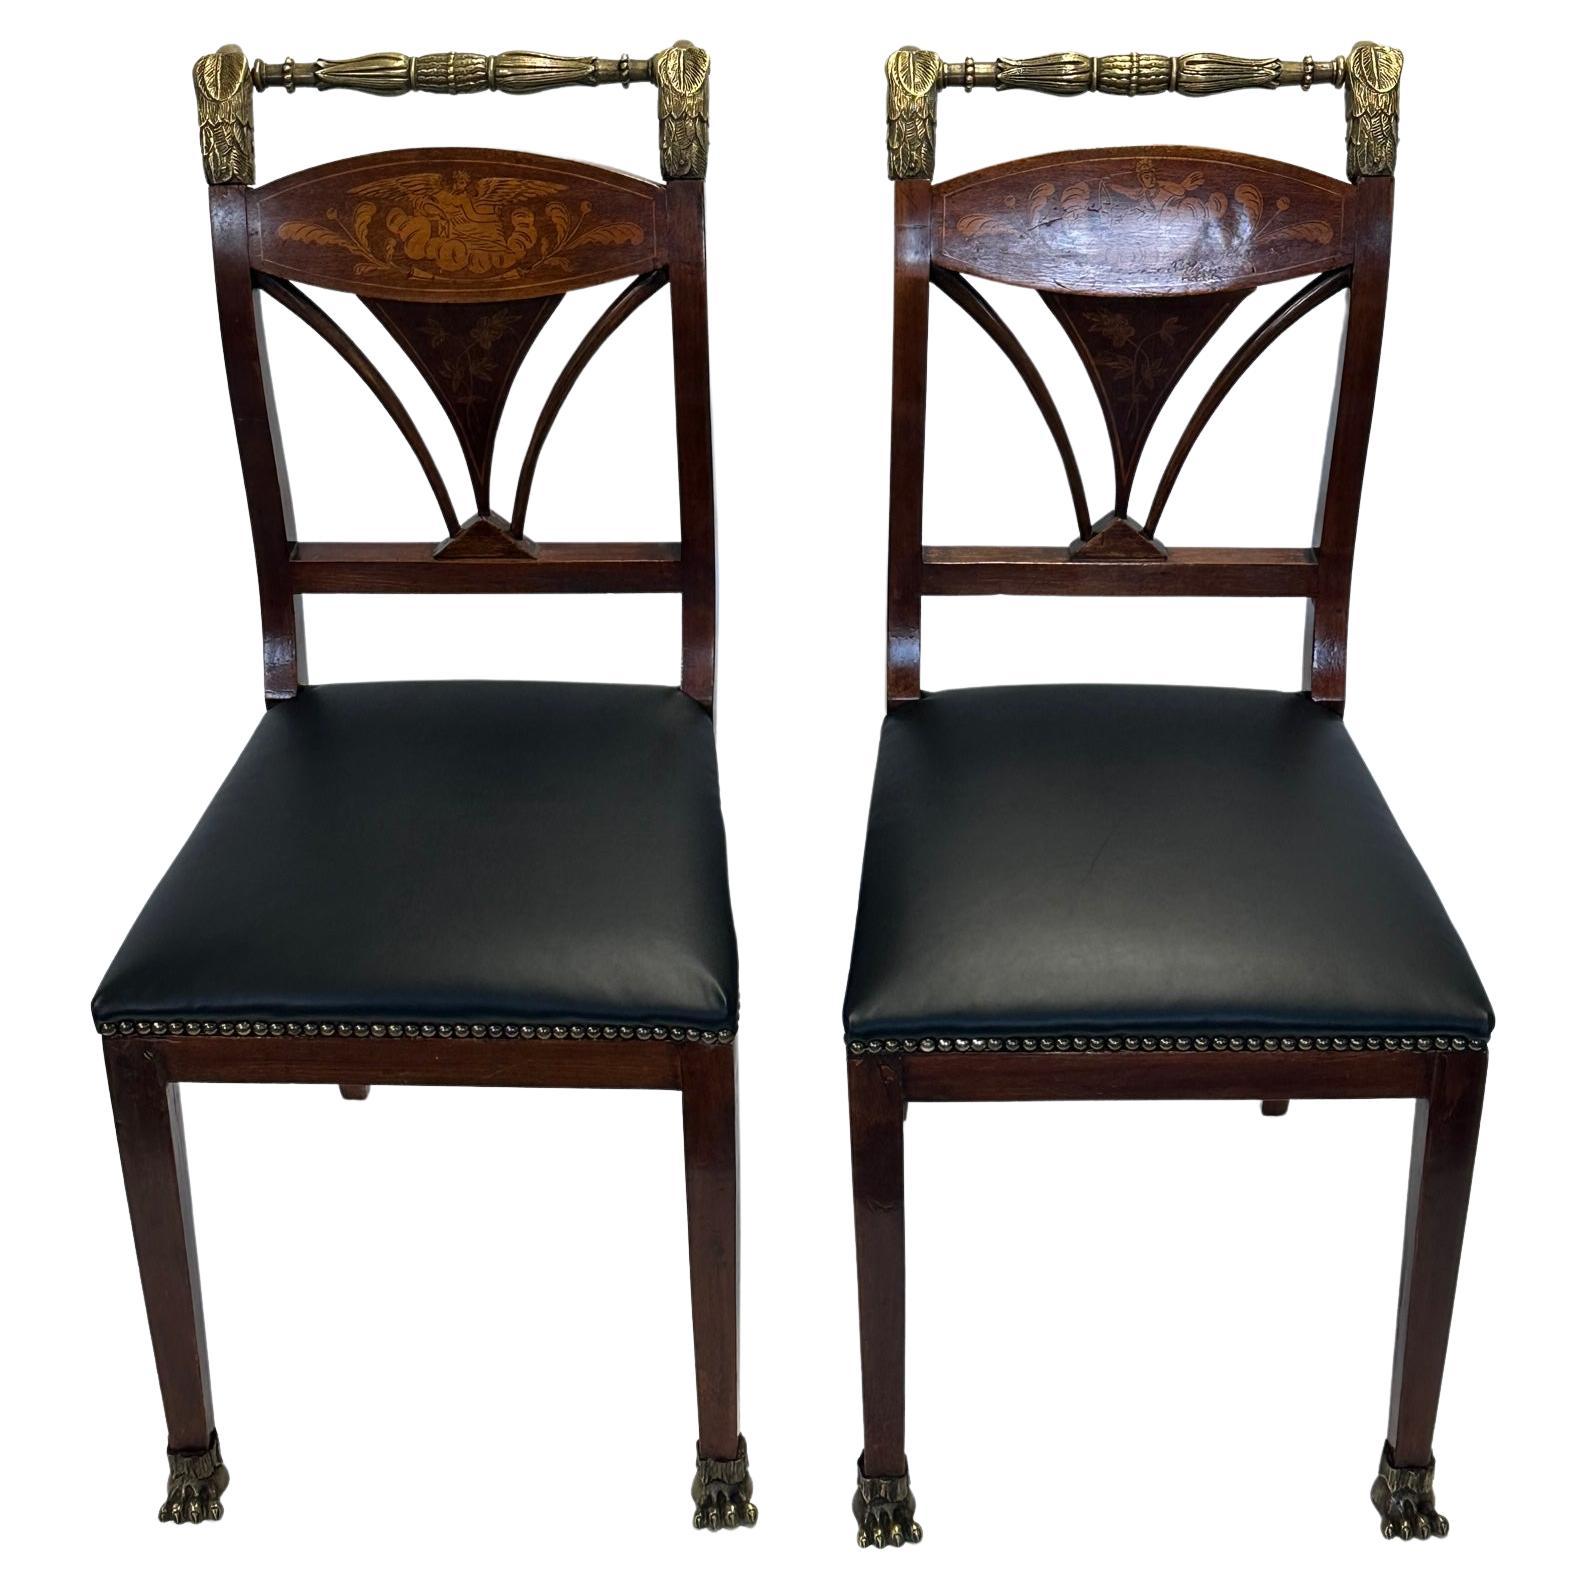 Amazing Pair of Early 19th Century Baltic Mahogany Eagle Motif Side Chairs For Sale